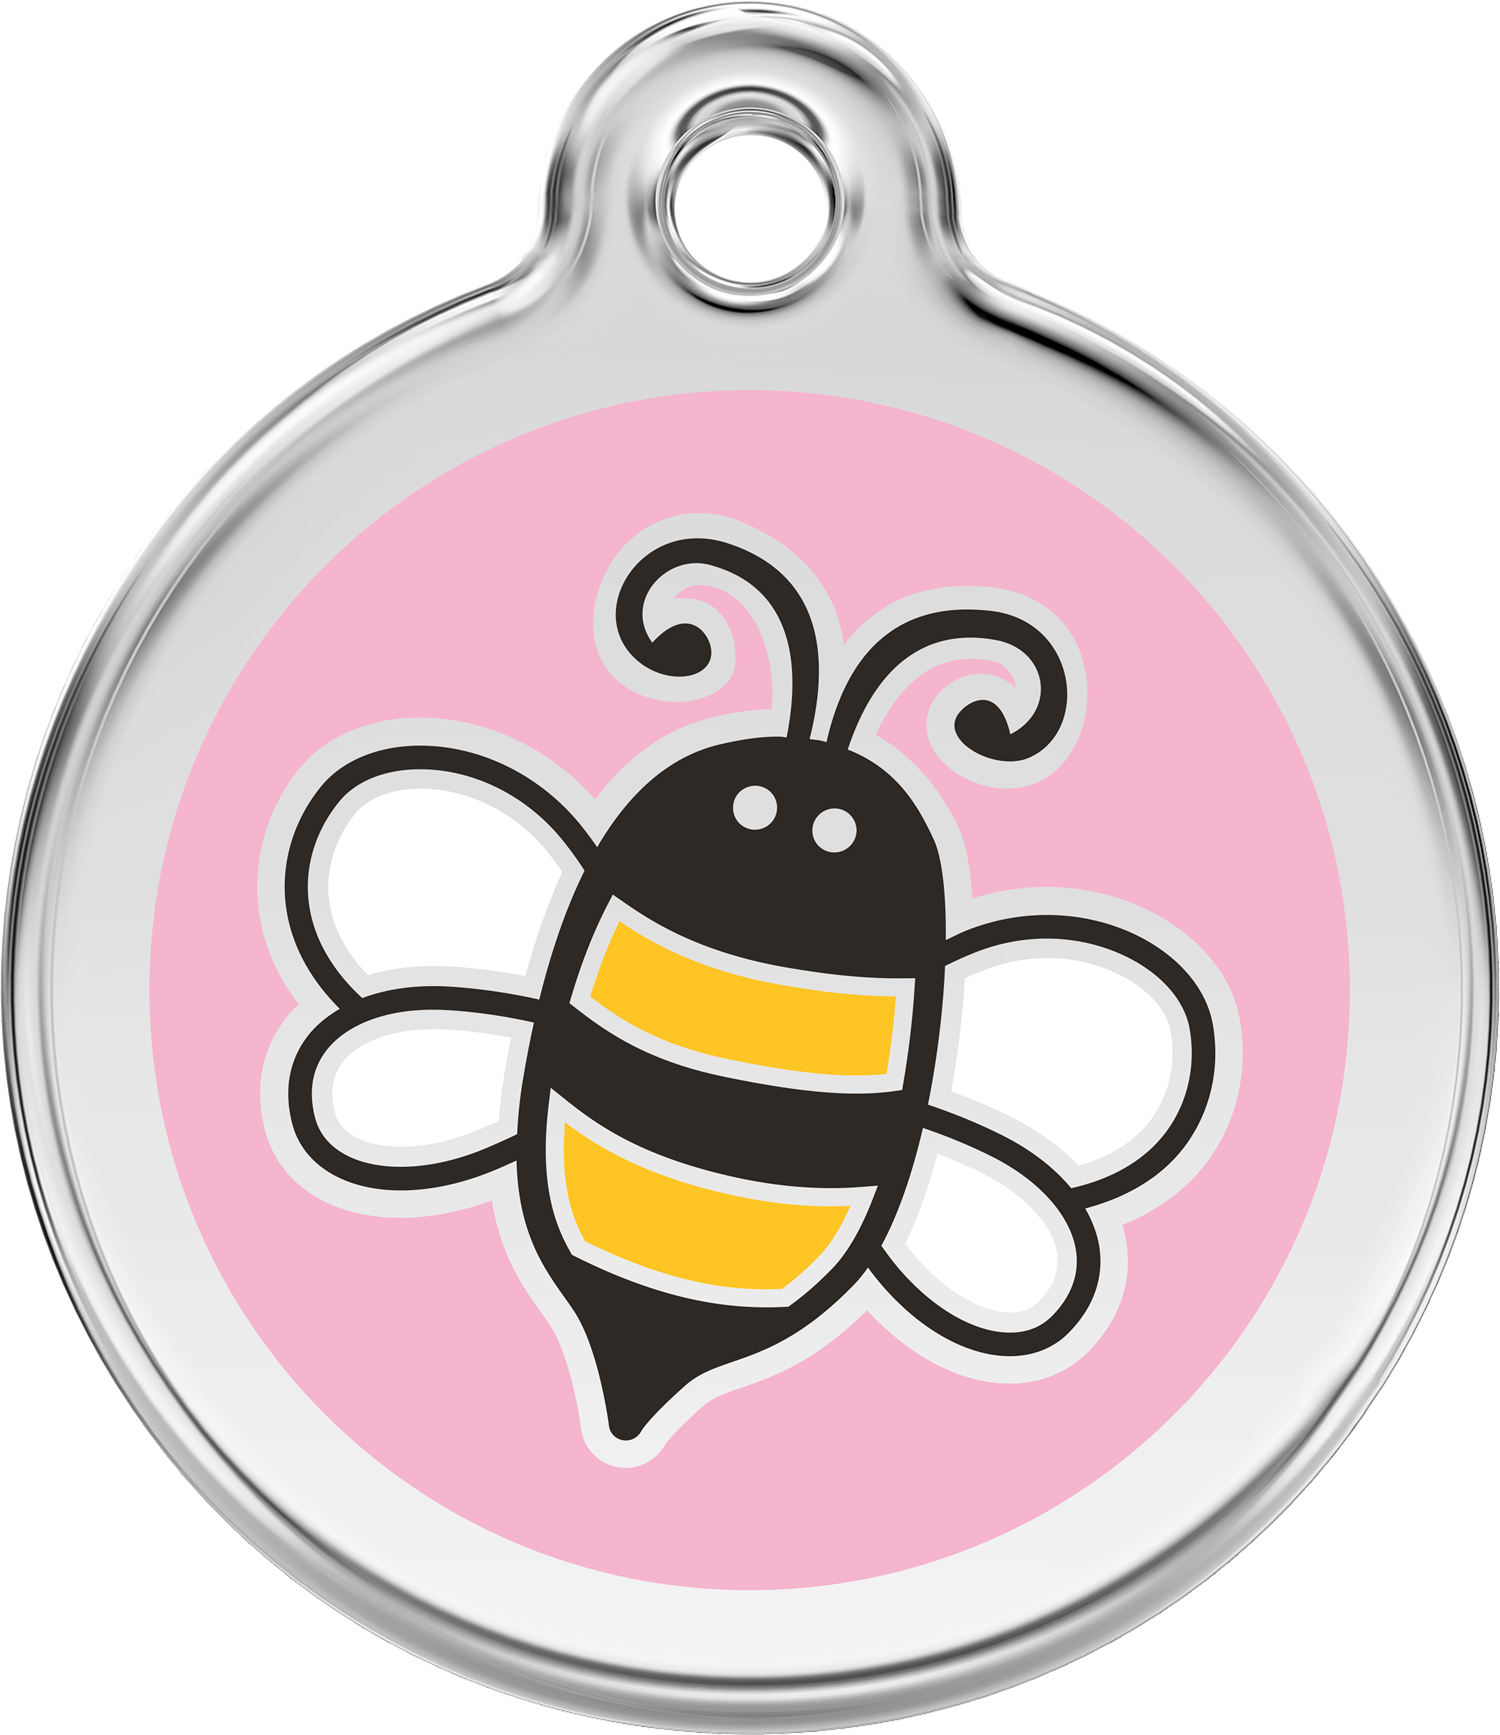 Red Dingo Stainless Steel & Enamel Bumble Bee Dog ID Tag - Pink